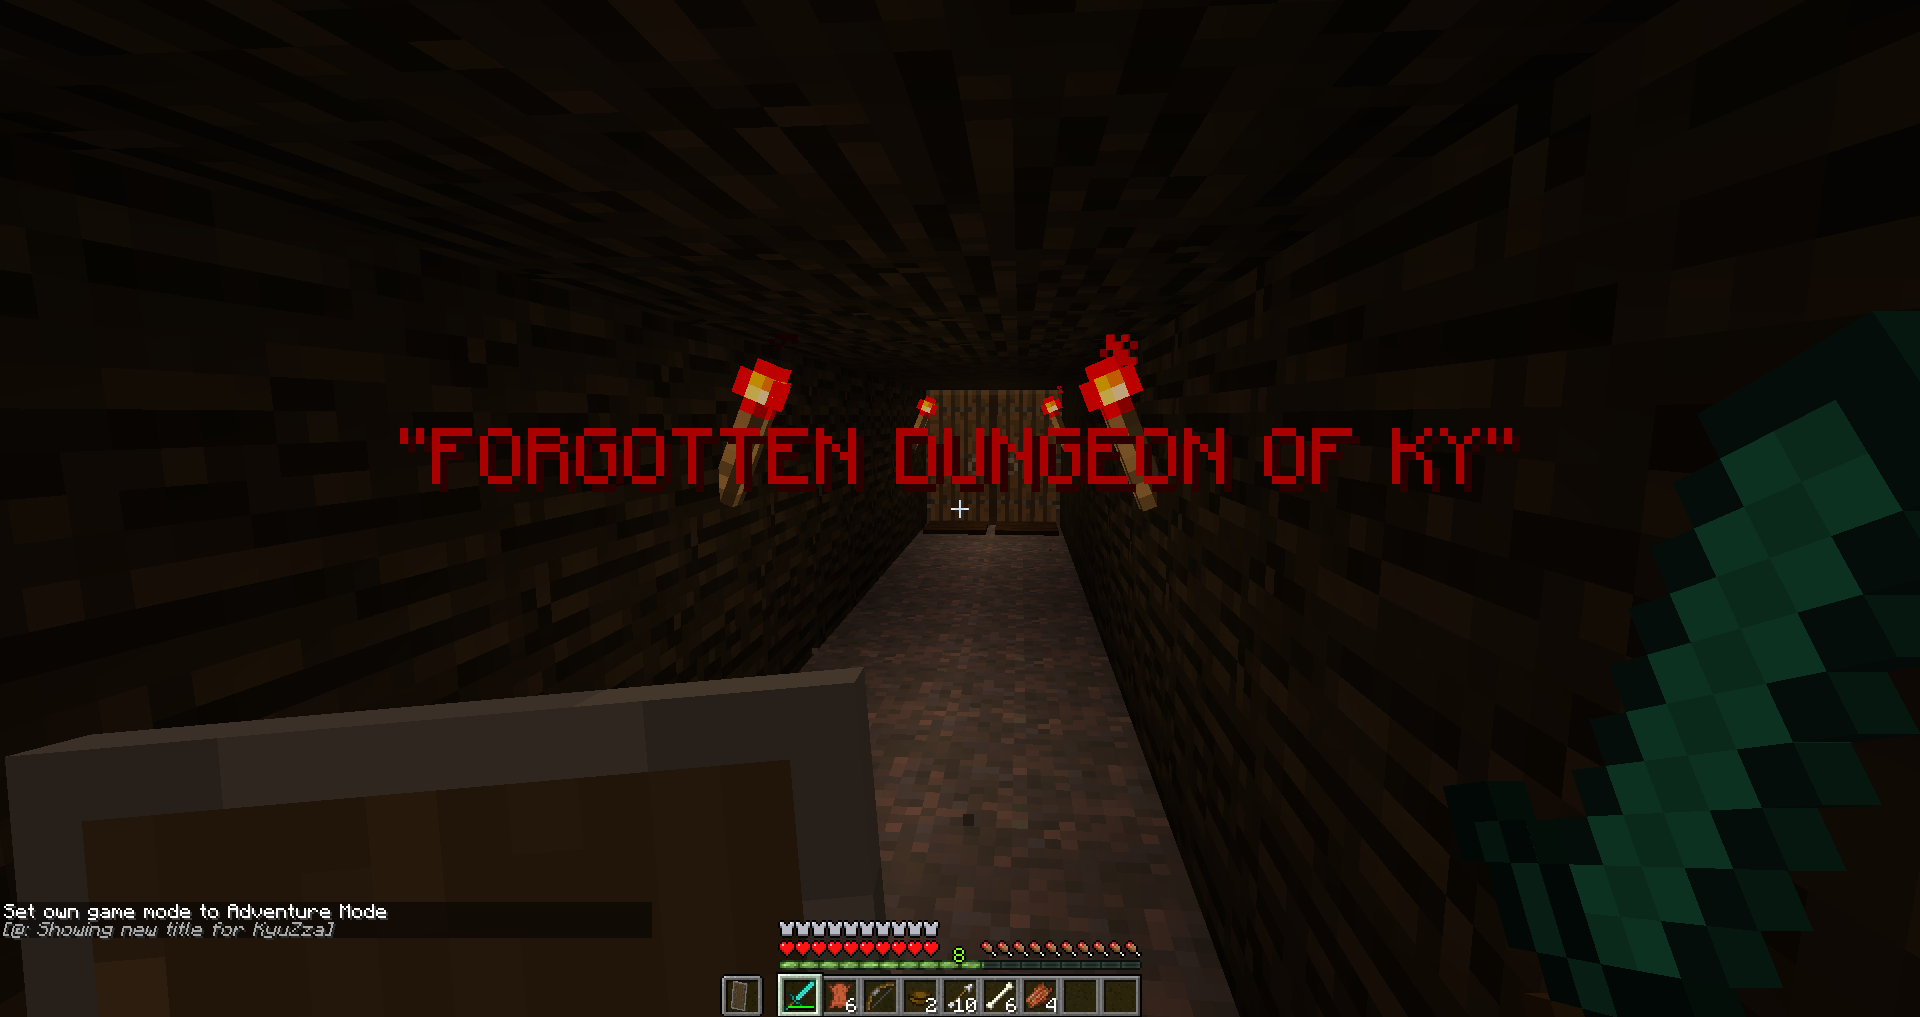 Download The Forgotten Dungeon Of Ky for Minecraft 1.13.2